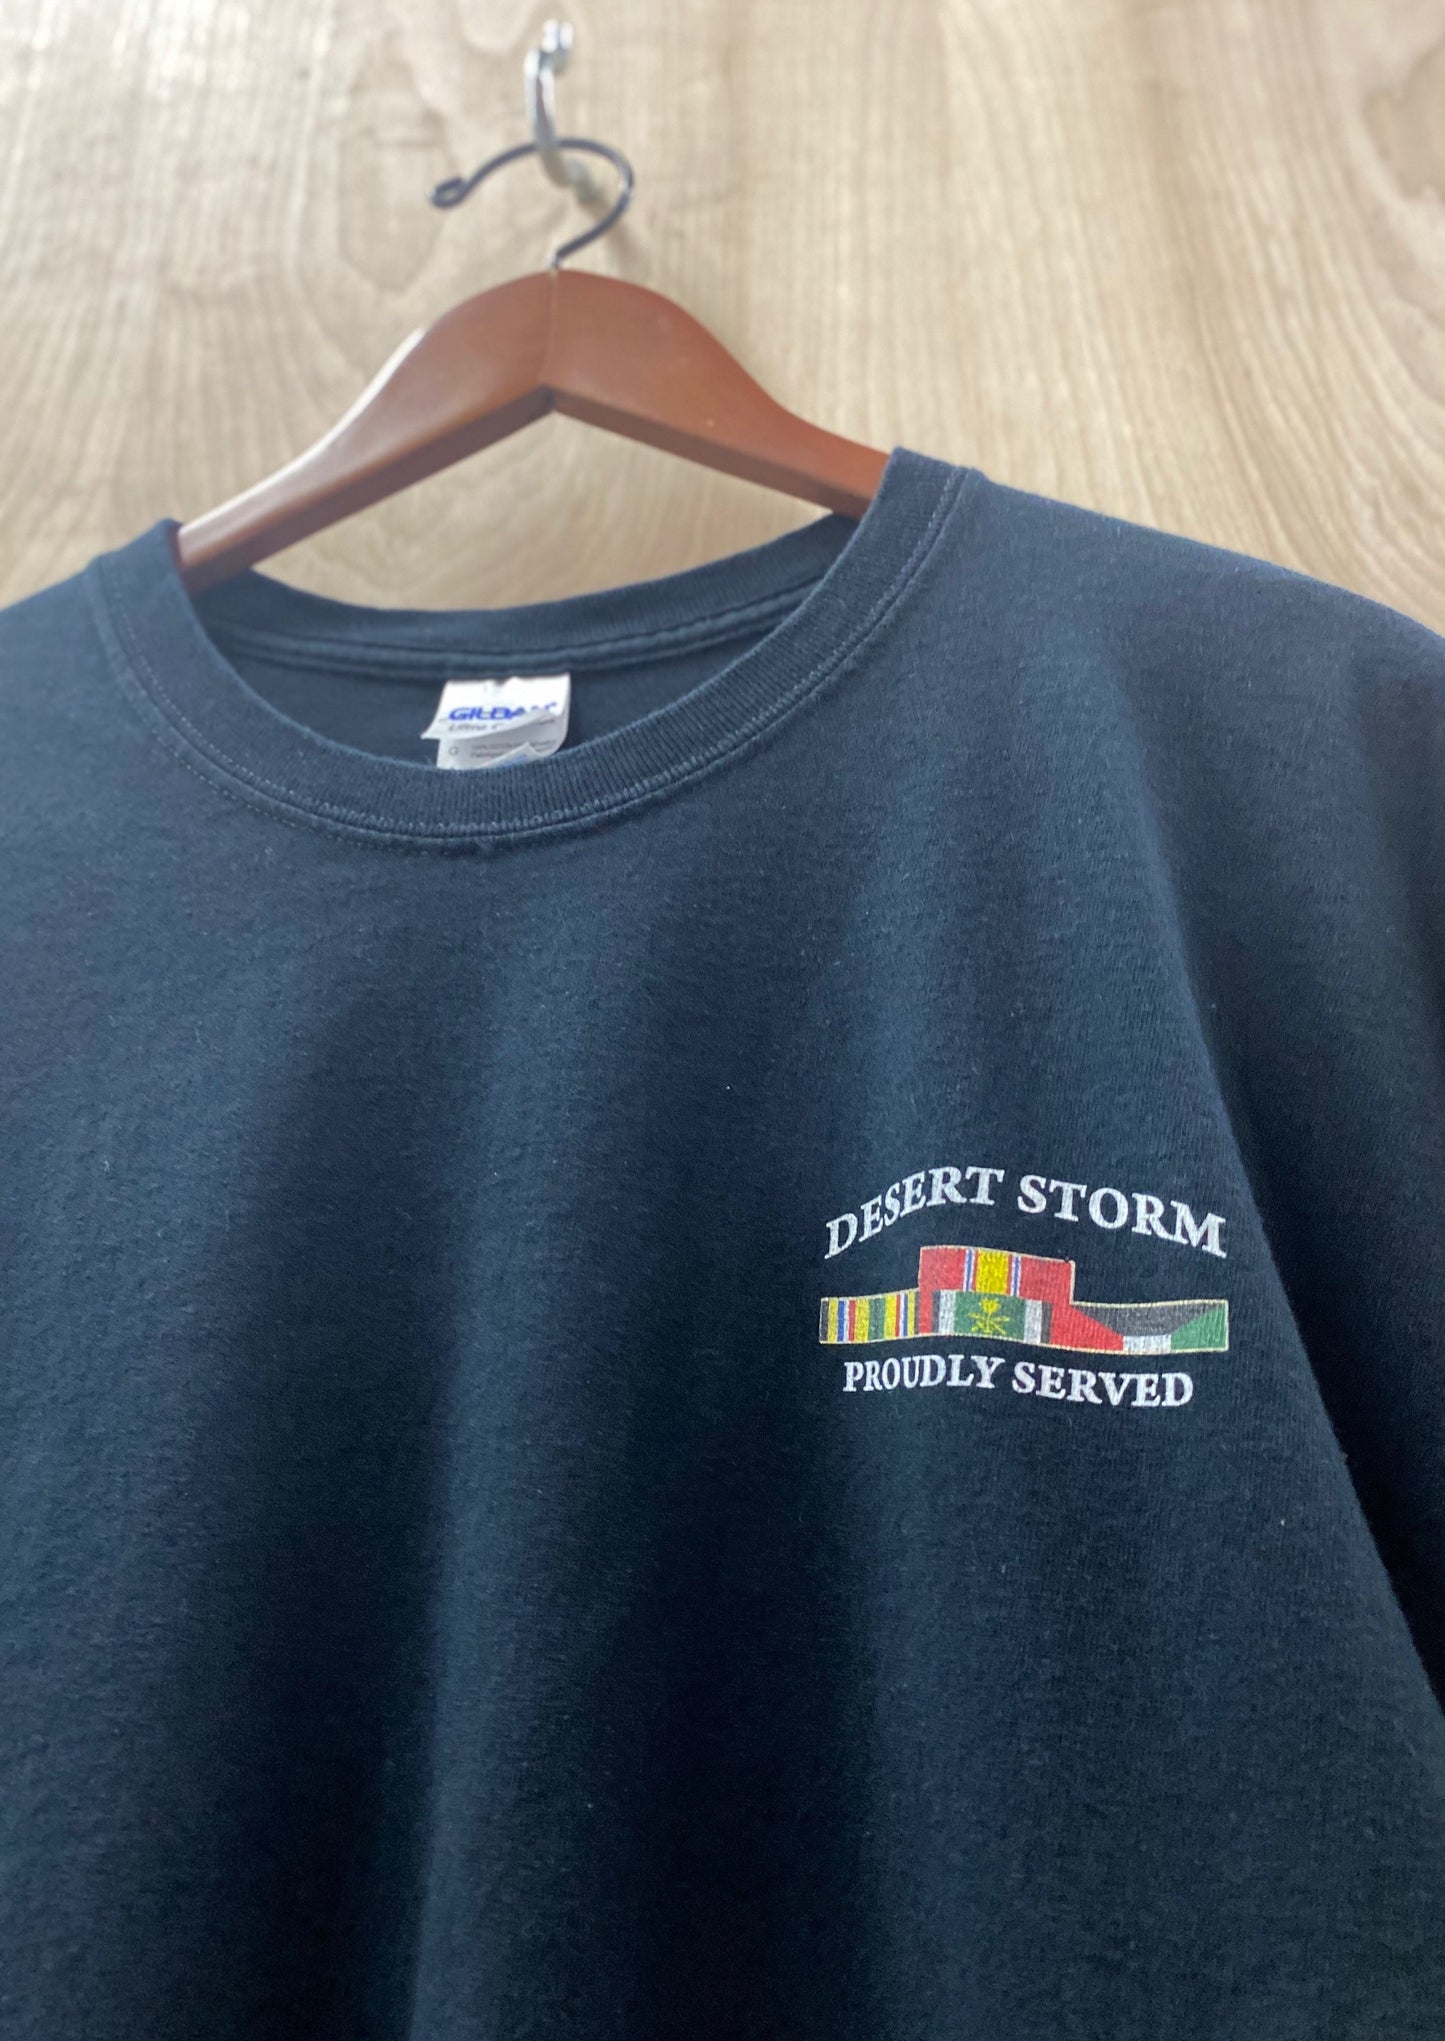 Load image into Gallery viewer, Desert Storm - Proudly Served T-Shirt (4811526766672)
